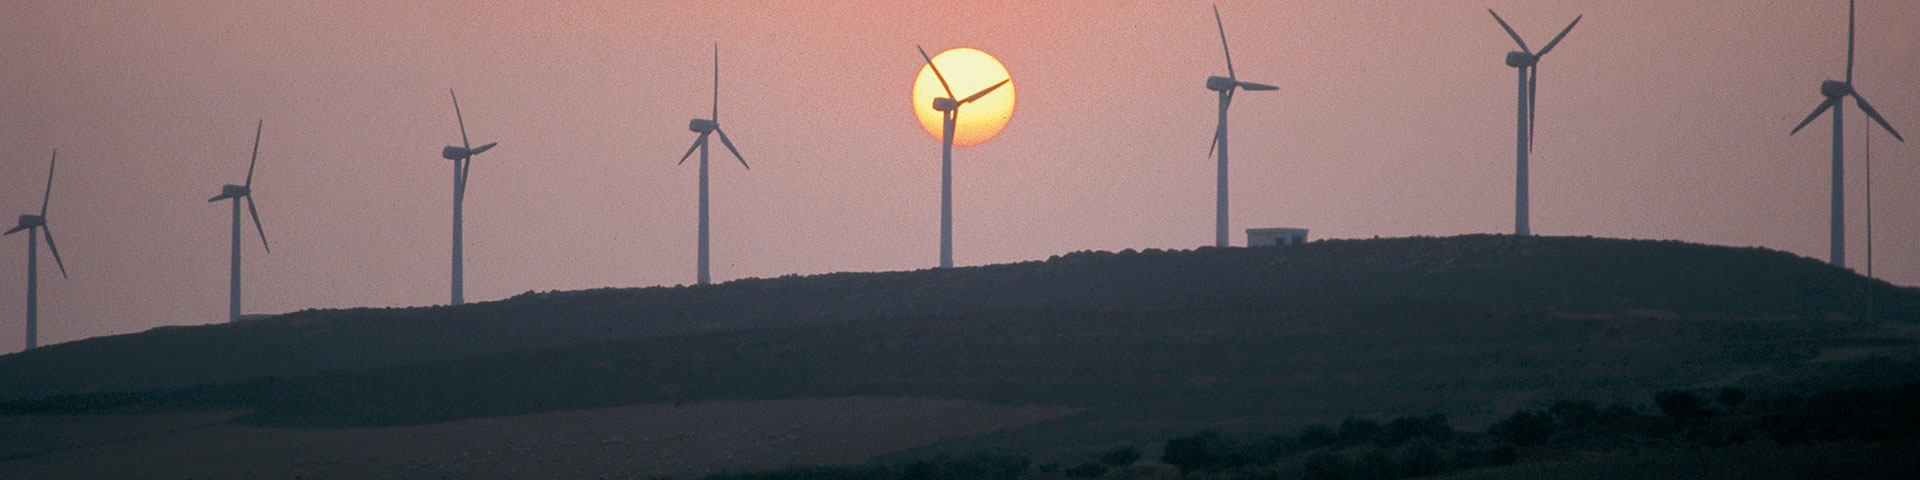 Wind turbines on a hill during a sunset.